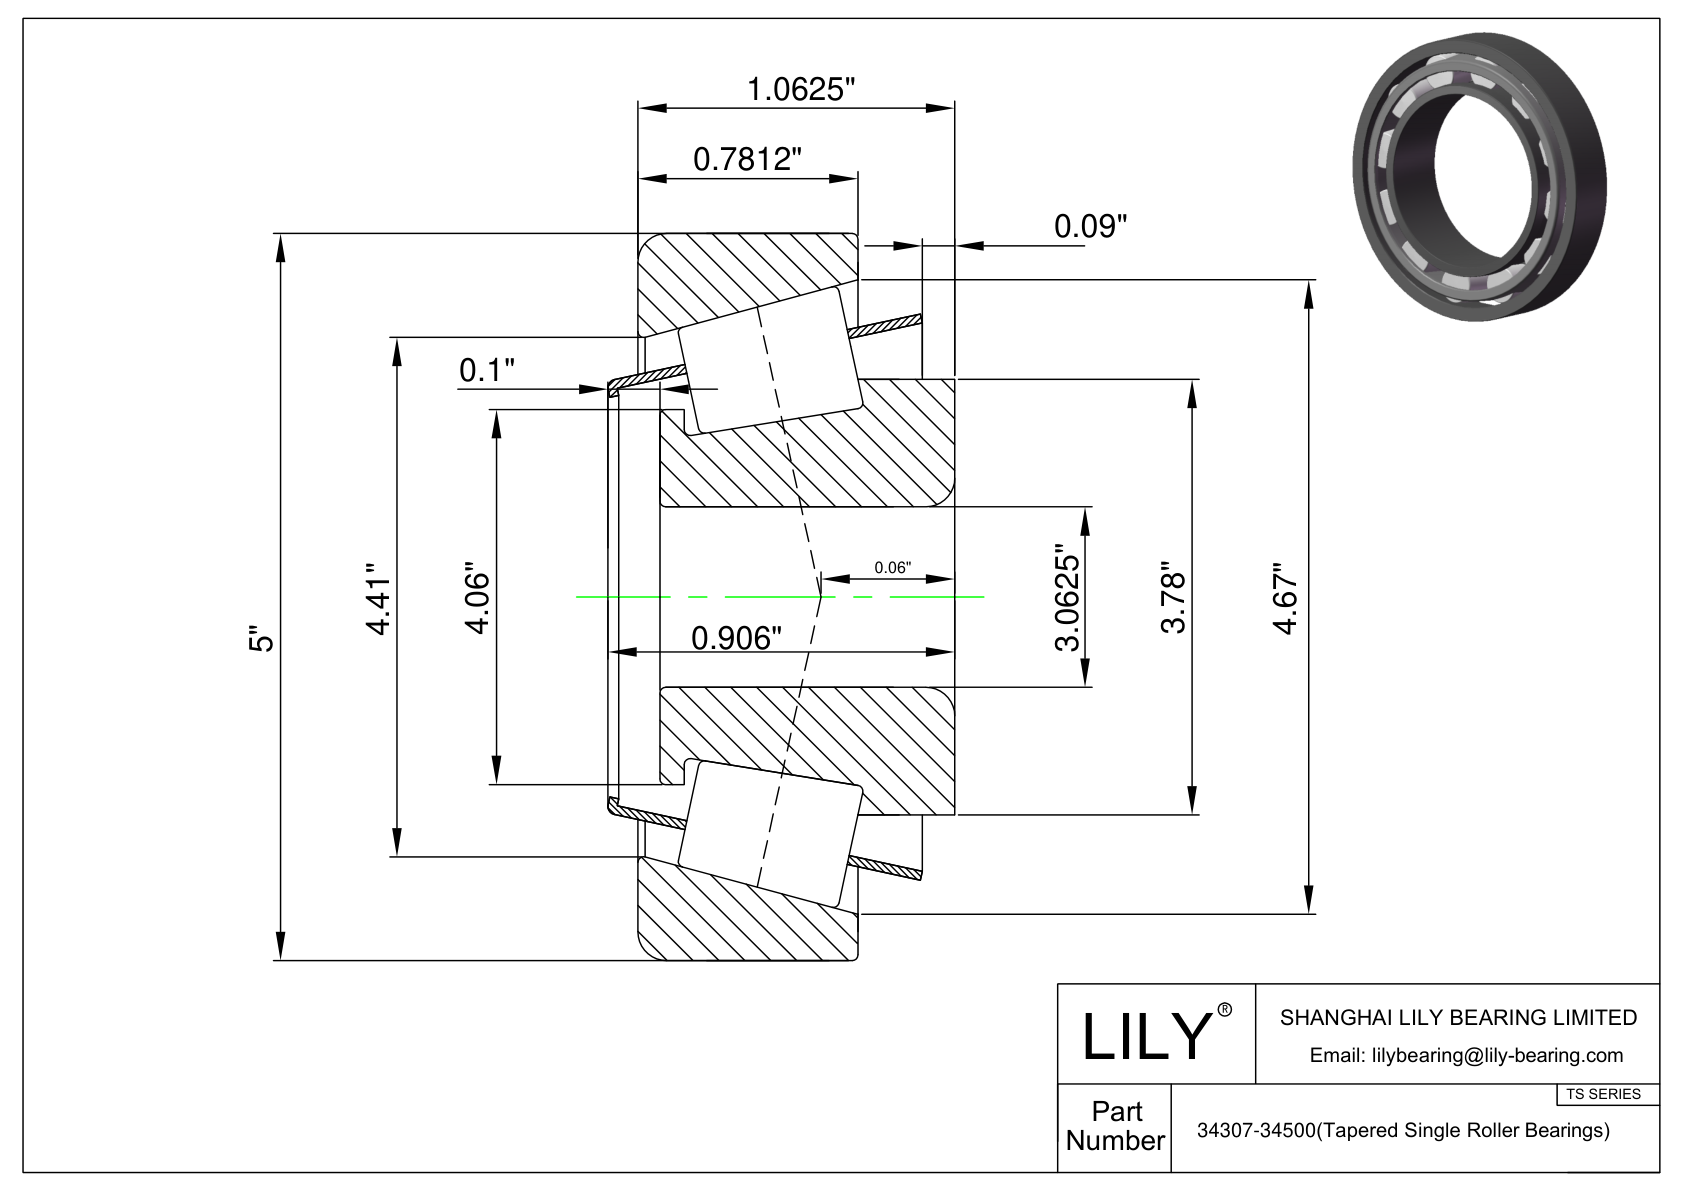 34307-34500 TS (Tapered Single Roller Bearings) (Imperial) cad drawing